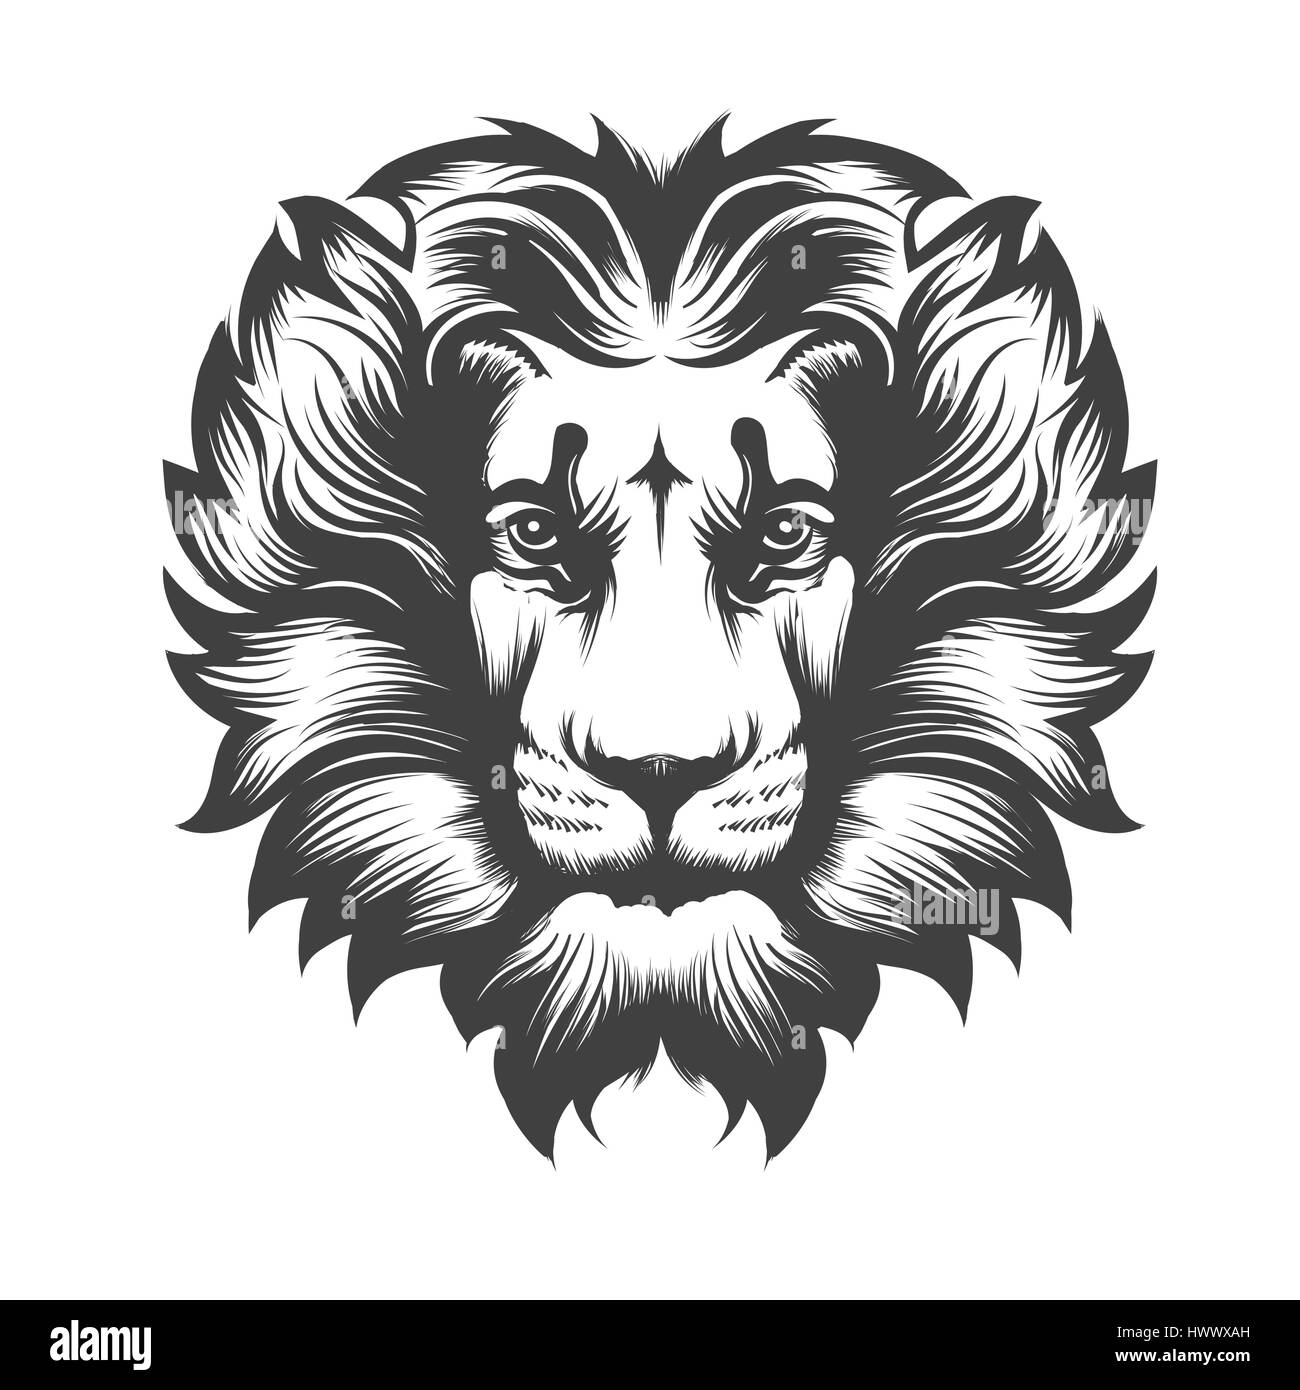 Leaping Lion Stock Illustrations – 110 Leaping Lion Stock Illustrations,  Vectors & Clipart - Dreamstime